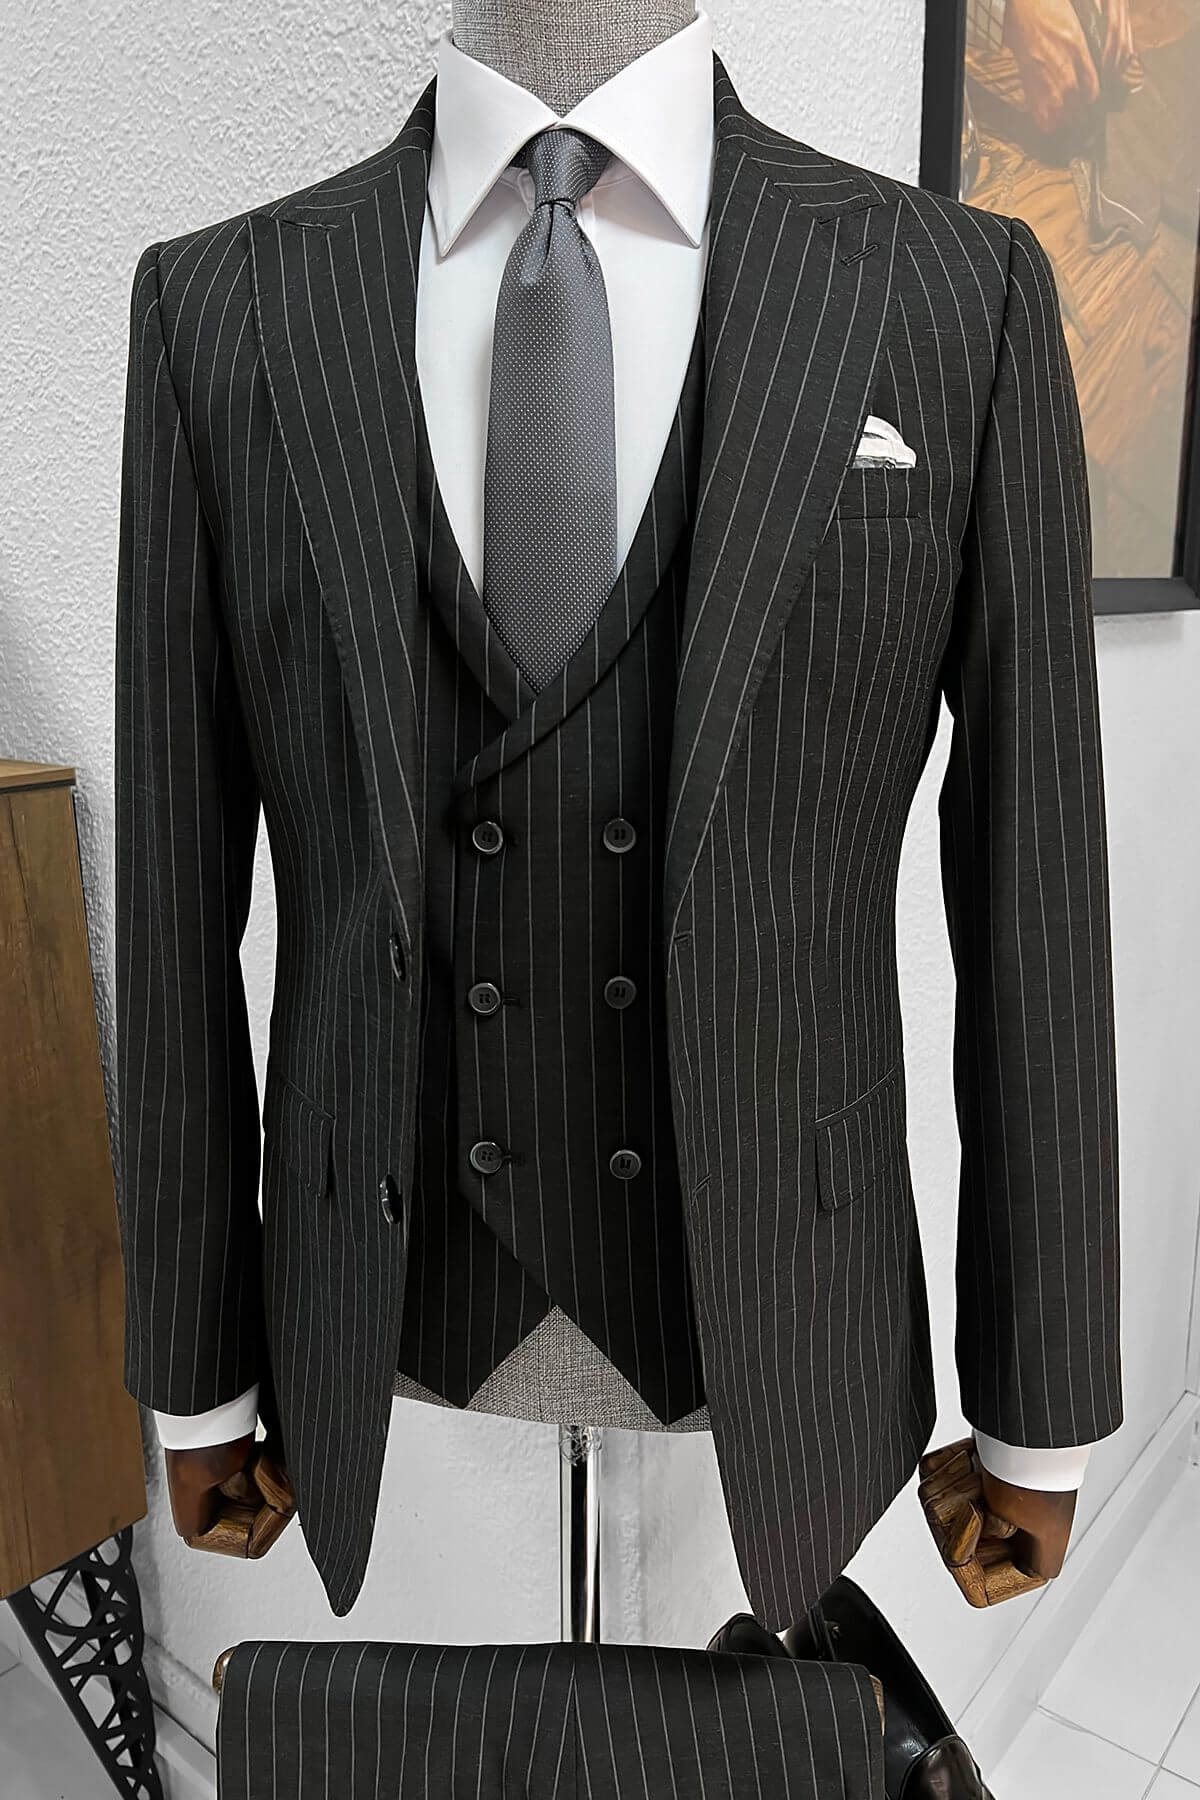 A Striped-Light Black- Suit on display